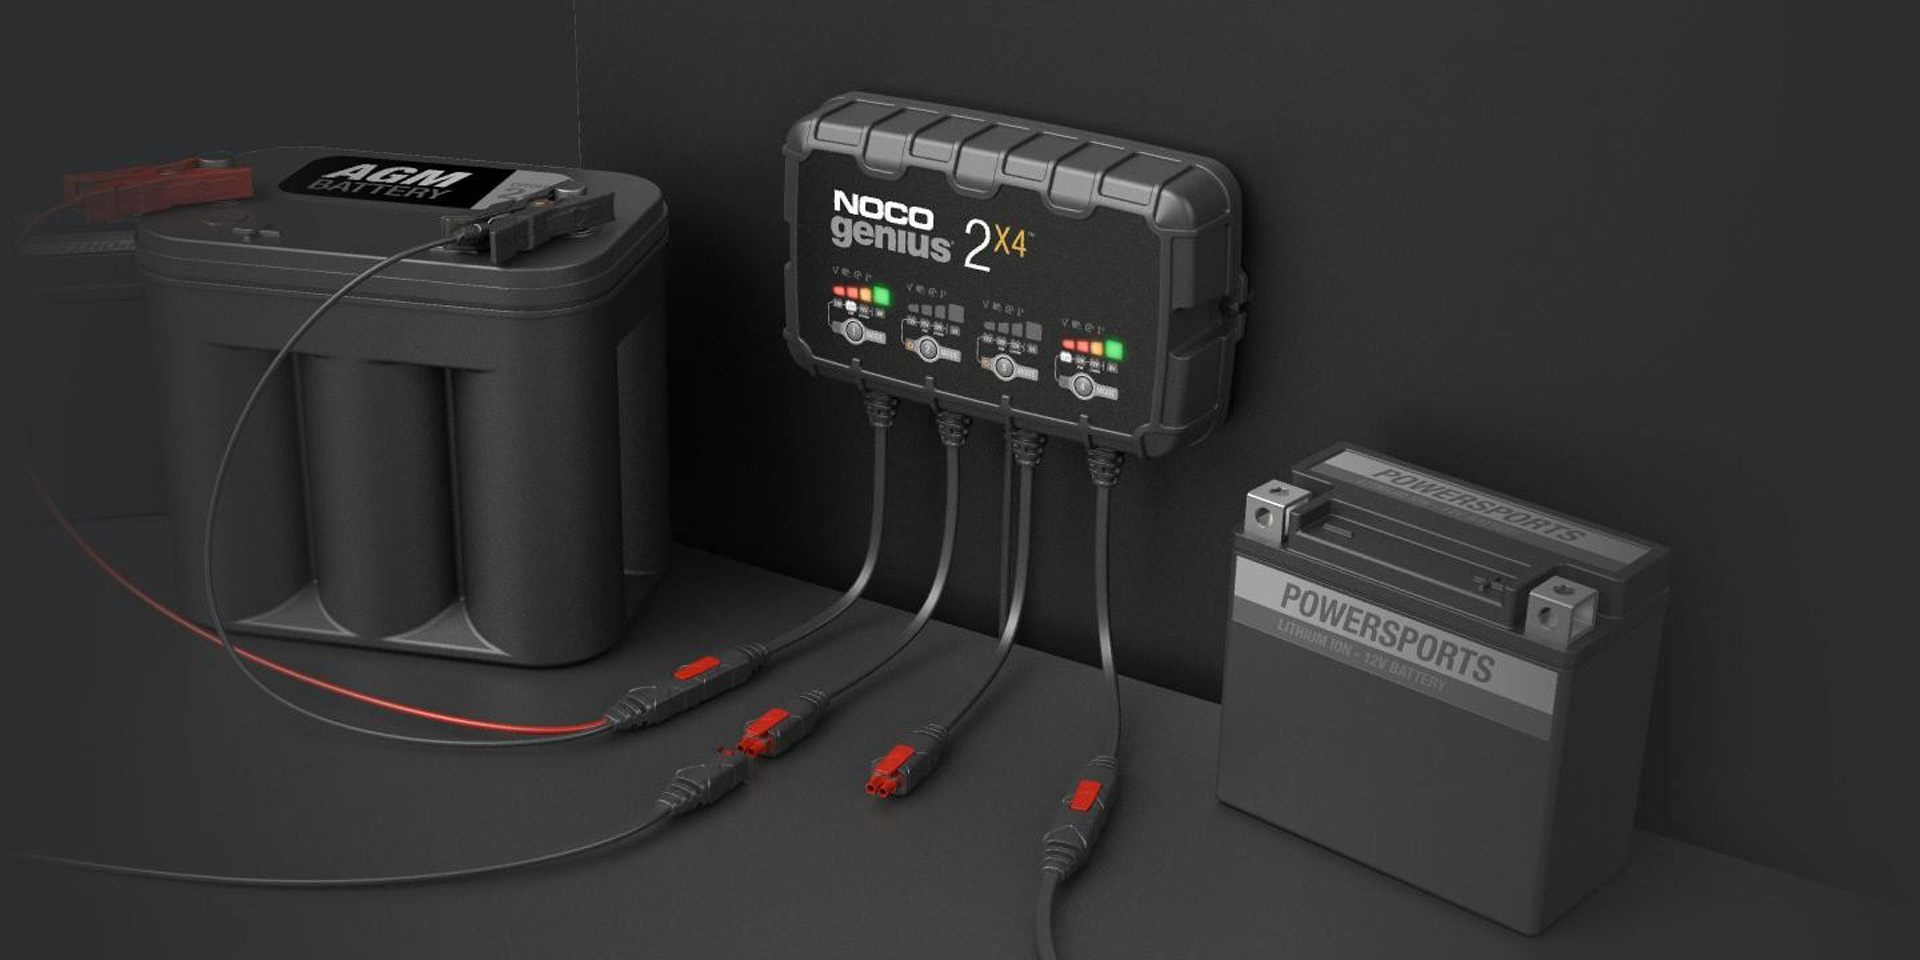 NOCO GENIUS 8A 4-Bank smart battery charger and maintainer